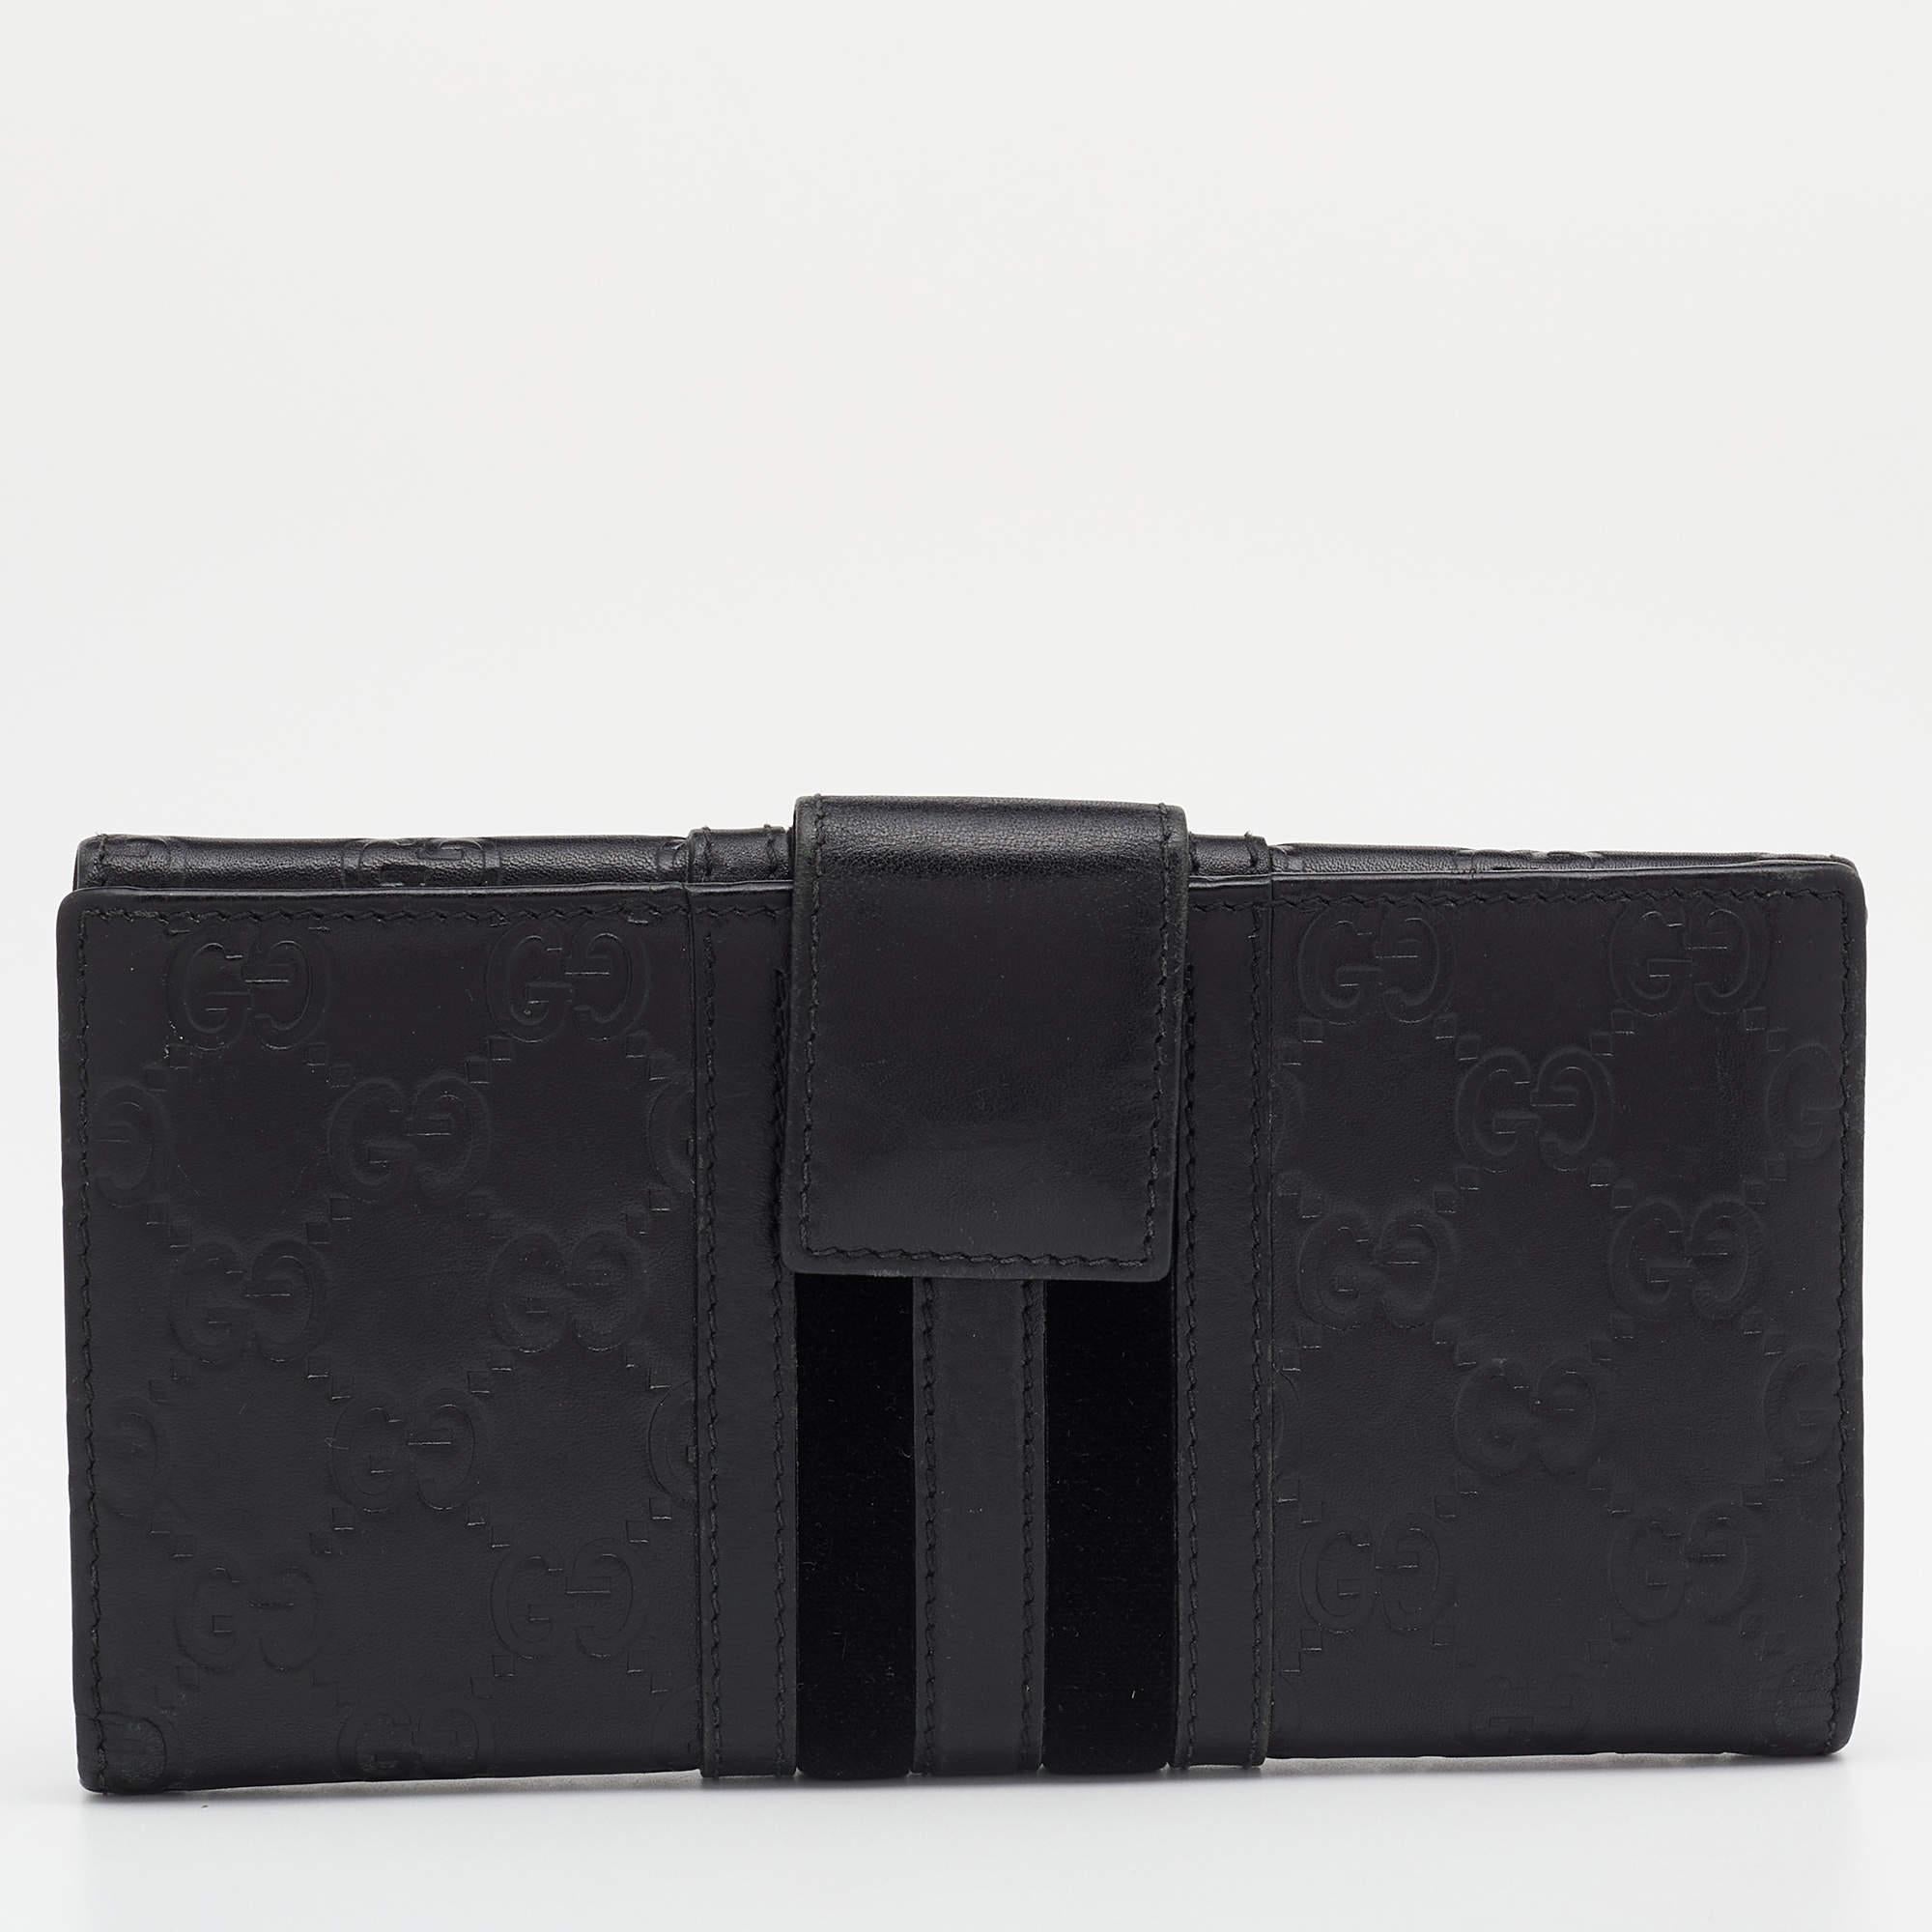 This Gucci wallet has a look of luxury. It is crafted from Guccissima leather as a bifold and equipped with compartments and multiple slots to neatly house your cards and cash.

